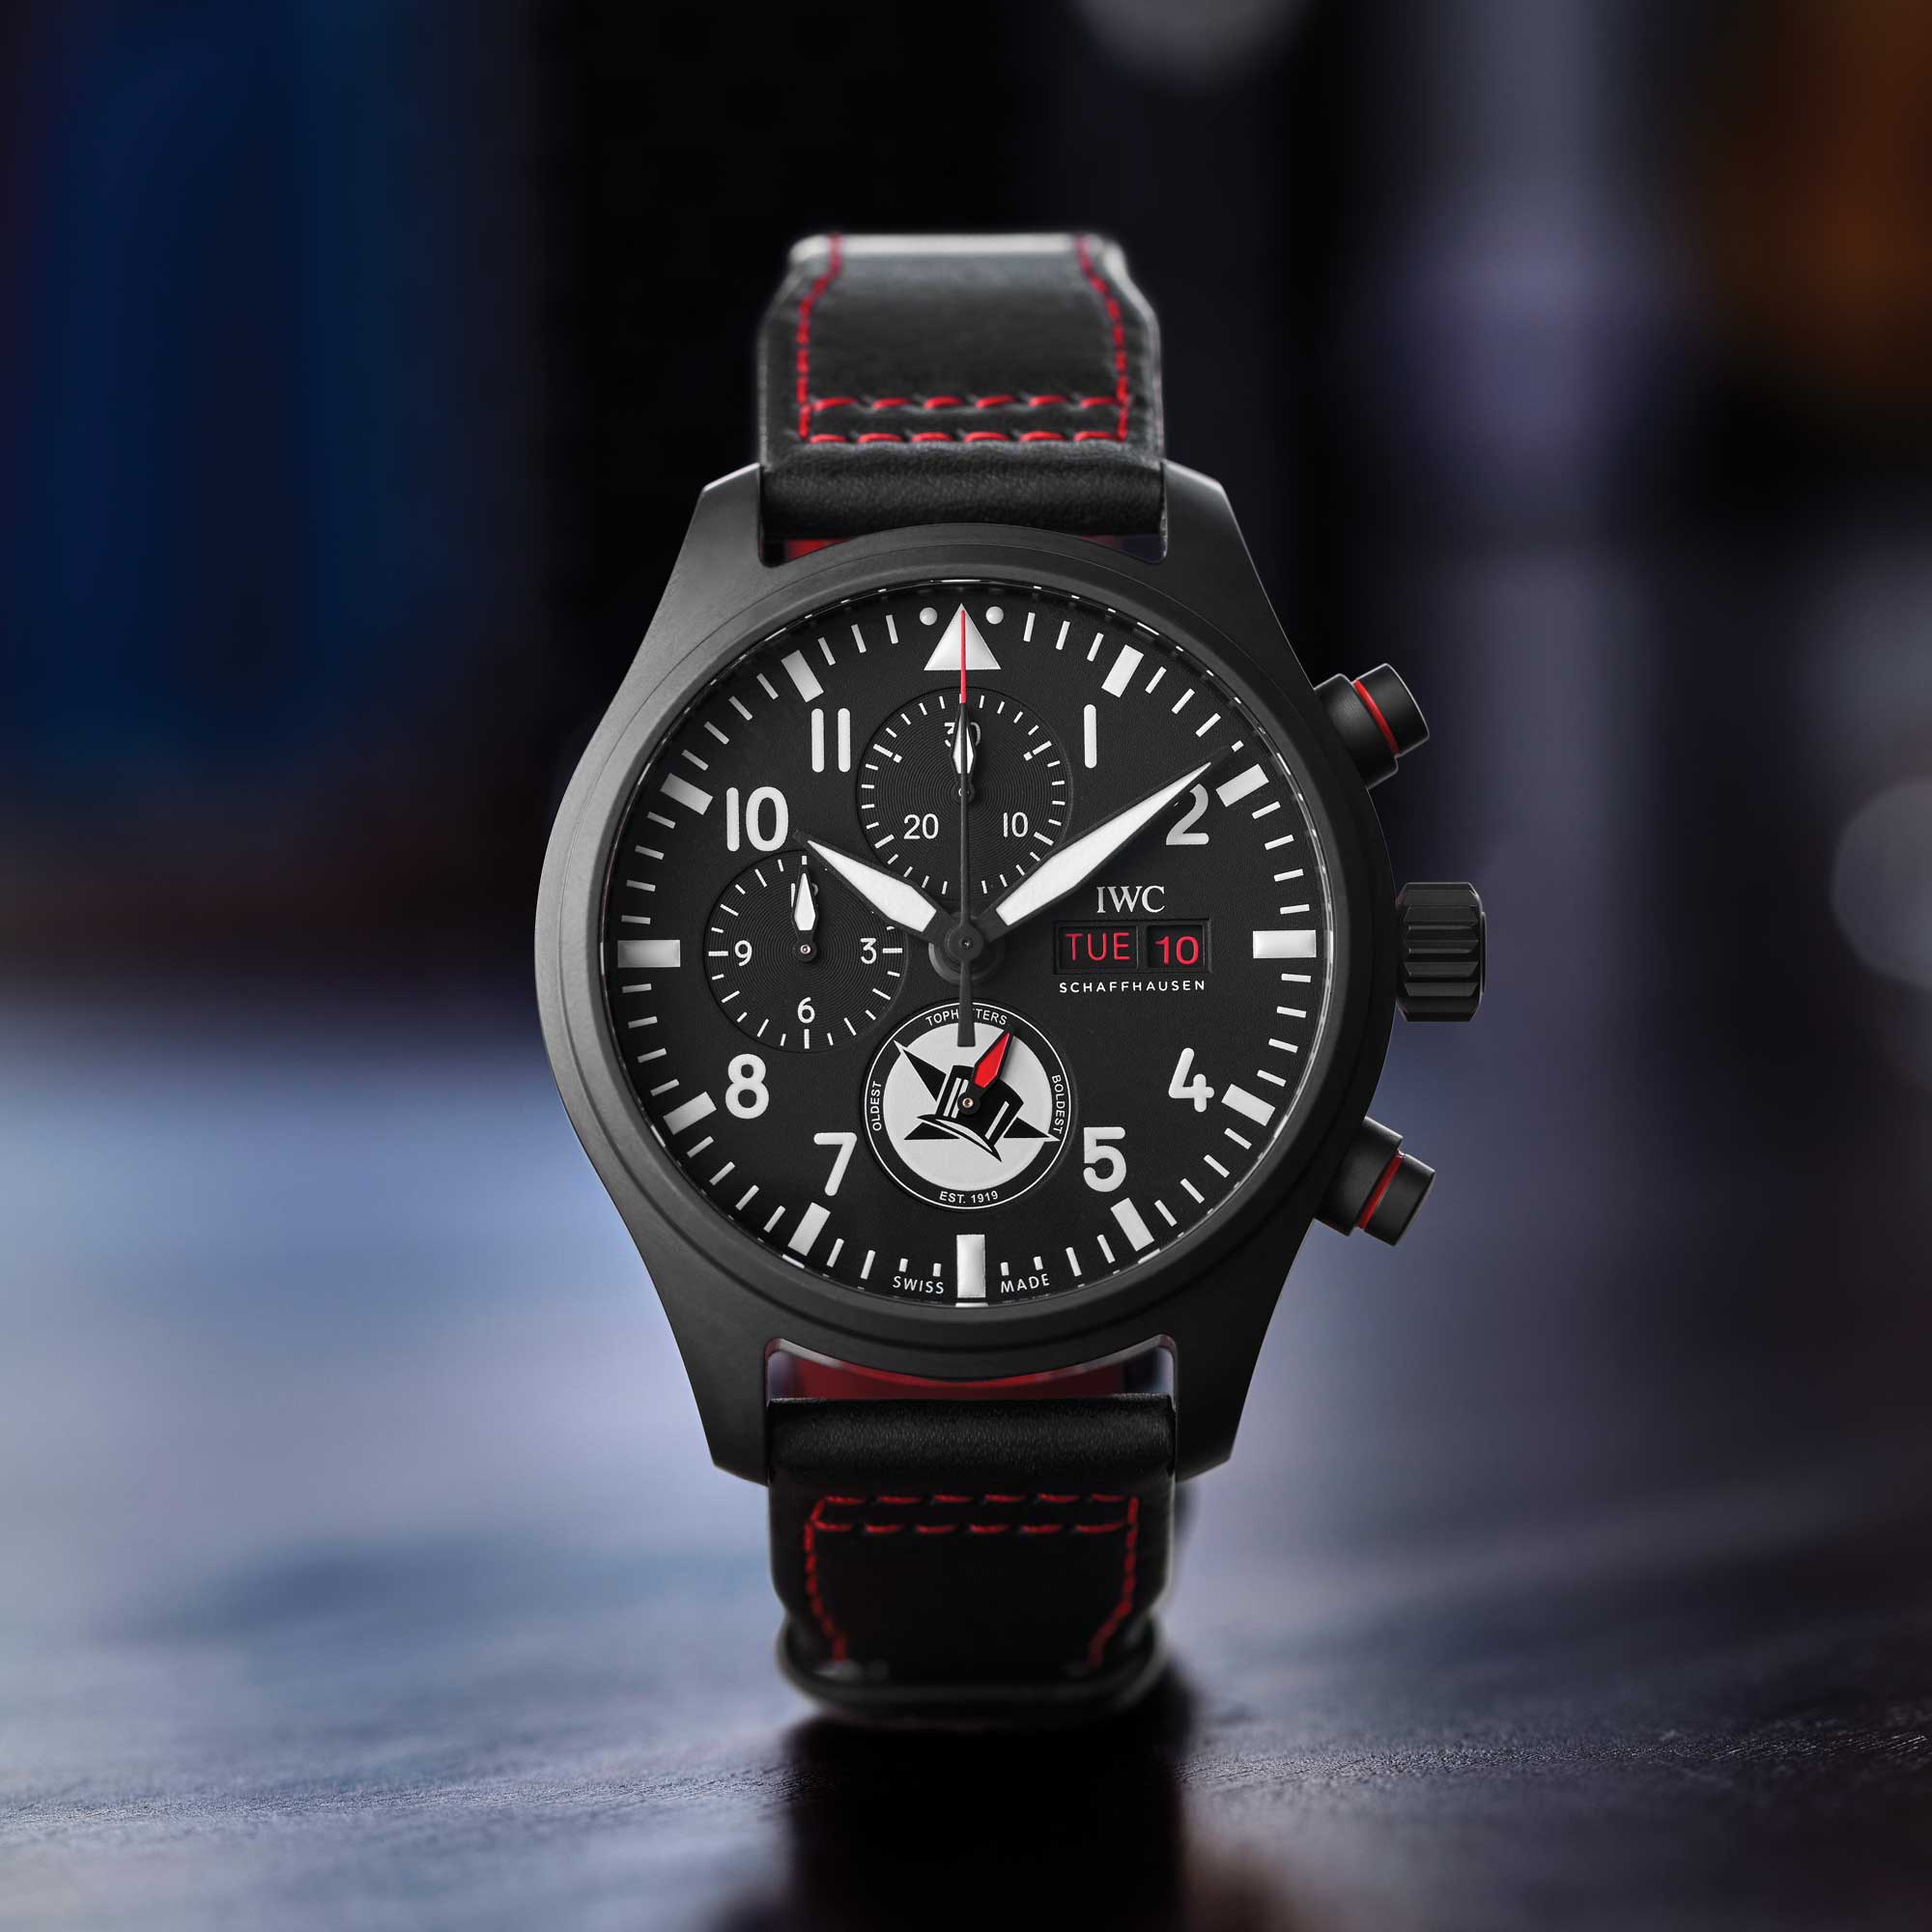 Pilot’s Watch Chronograph Edition “Tophatters”